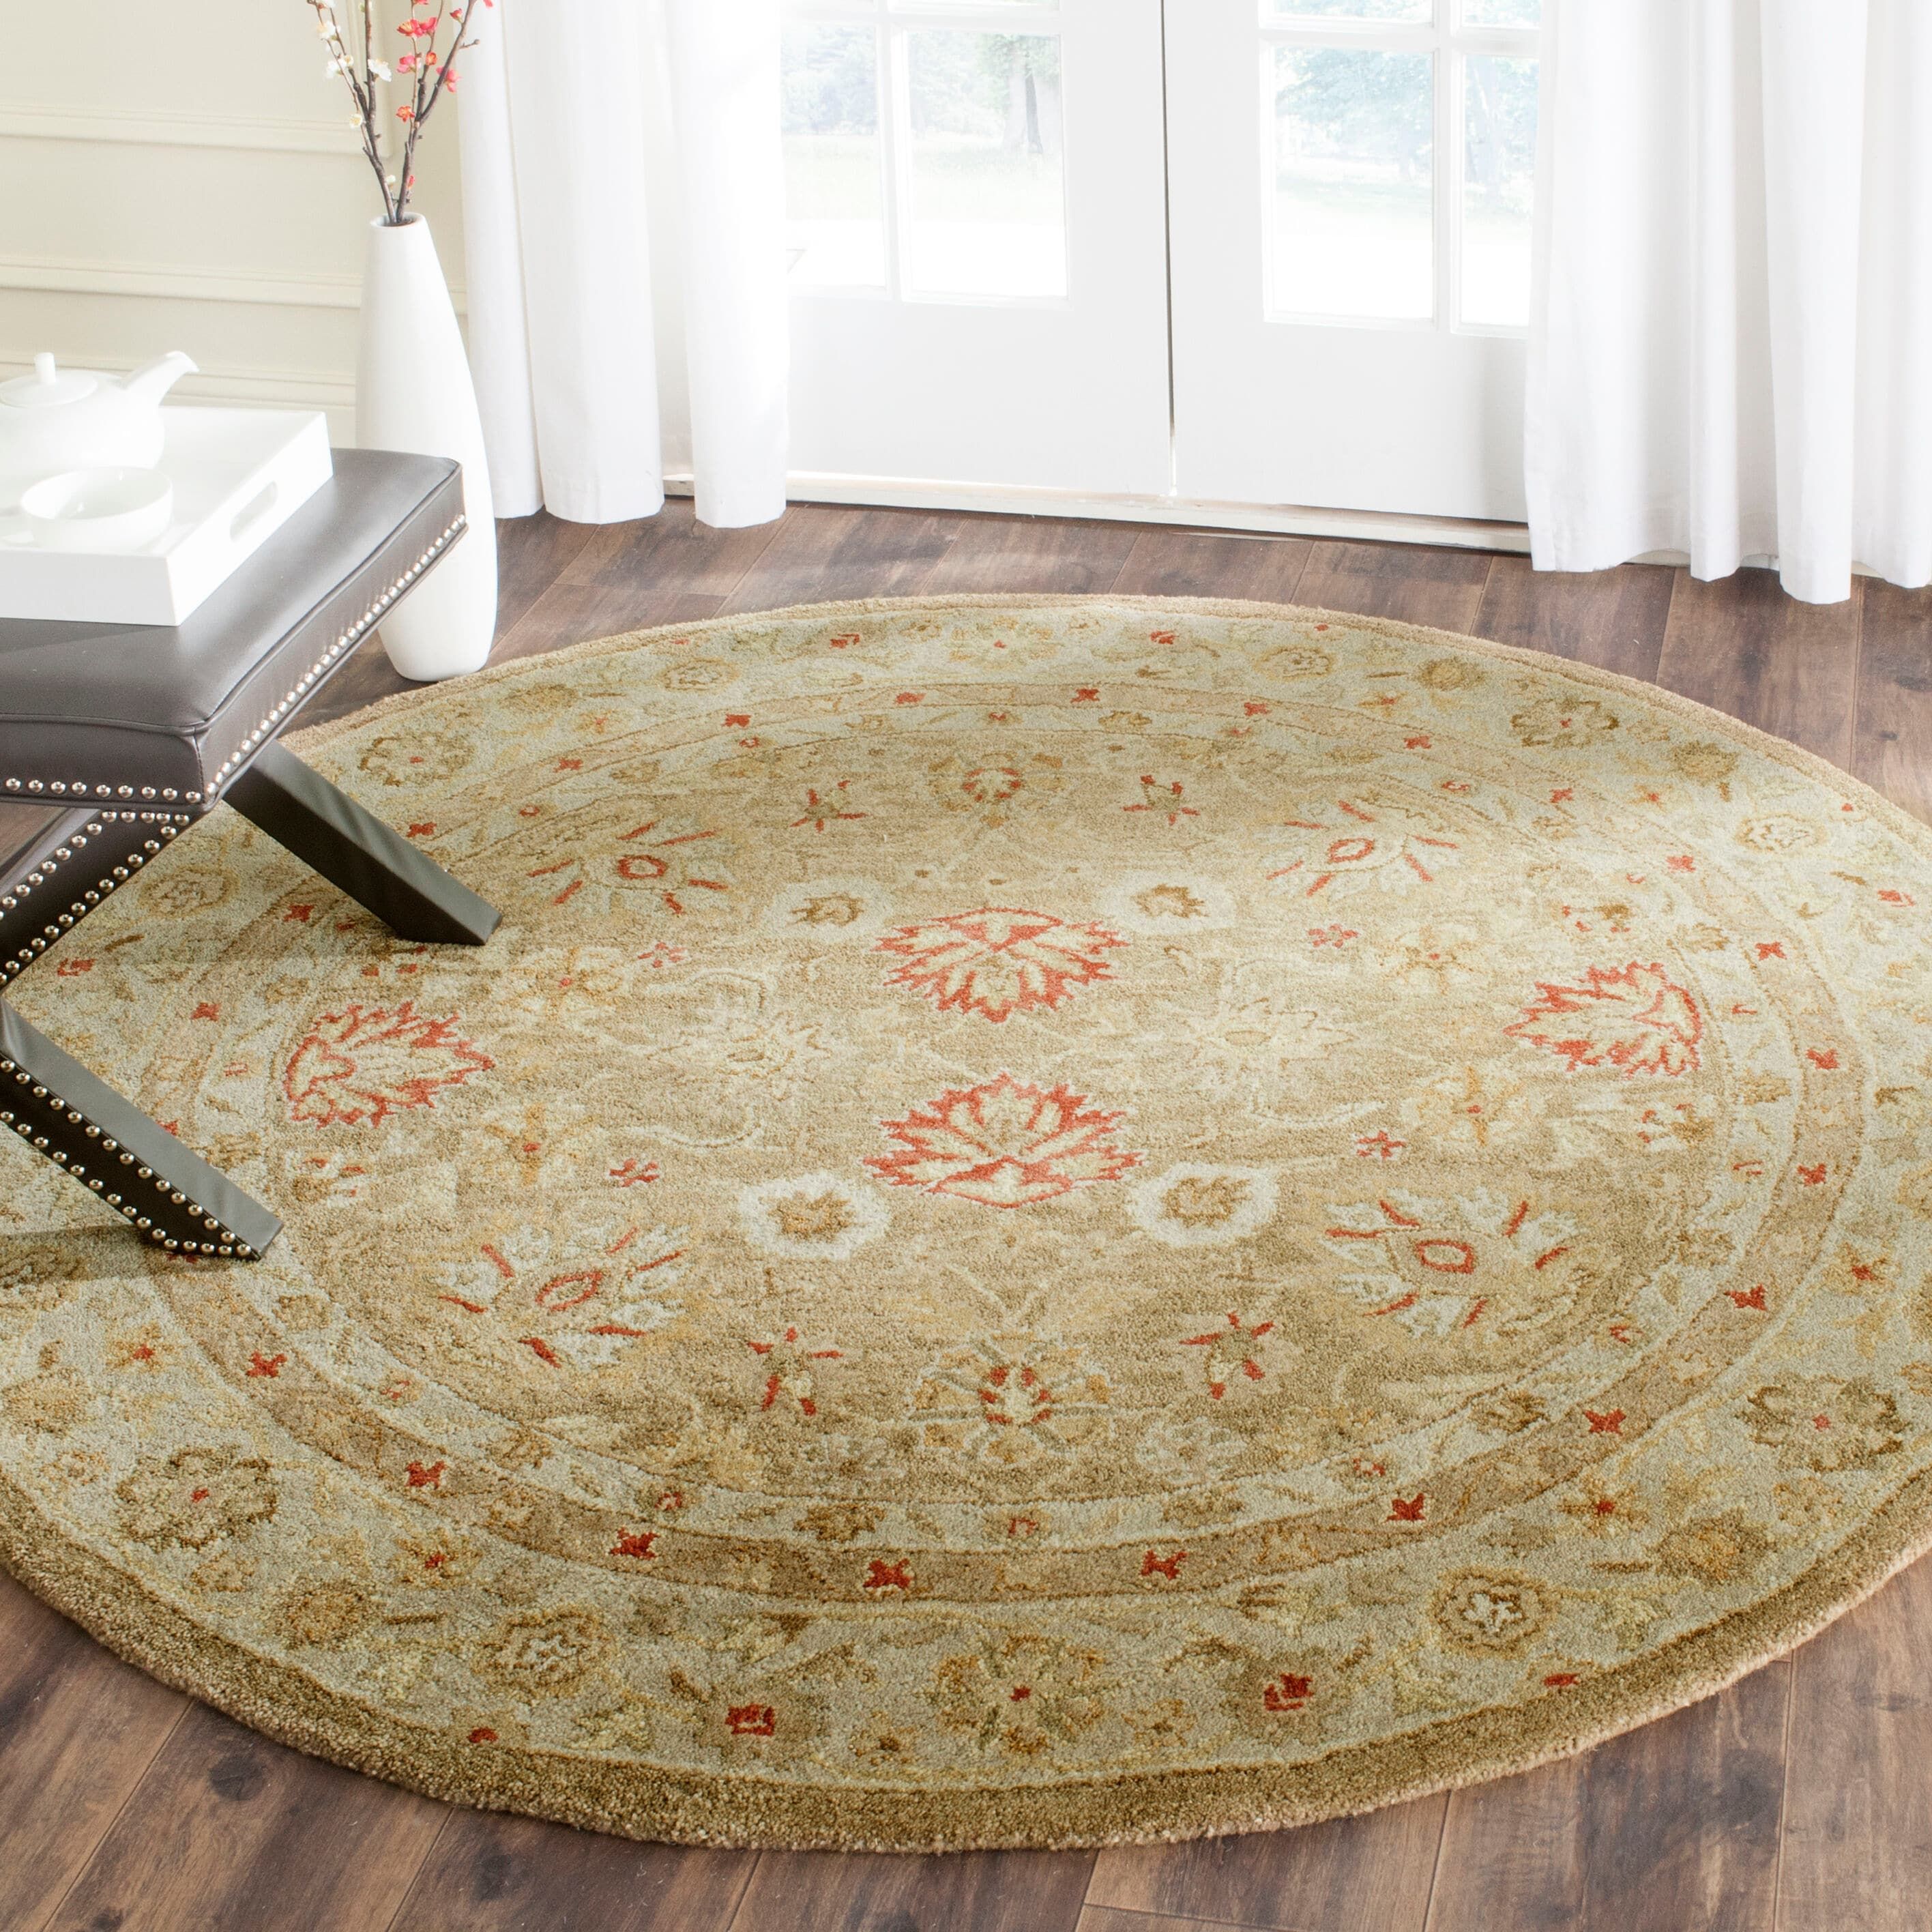 Safavieh 8 X 10 Wool Brown/Beige Oval Indoor Floral/Botanical Vintage Area  Rug In The Rugs Department At Lowes With Botanical Oval Rugs (Photo 13 of 15)